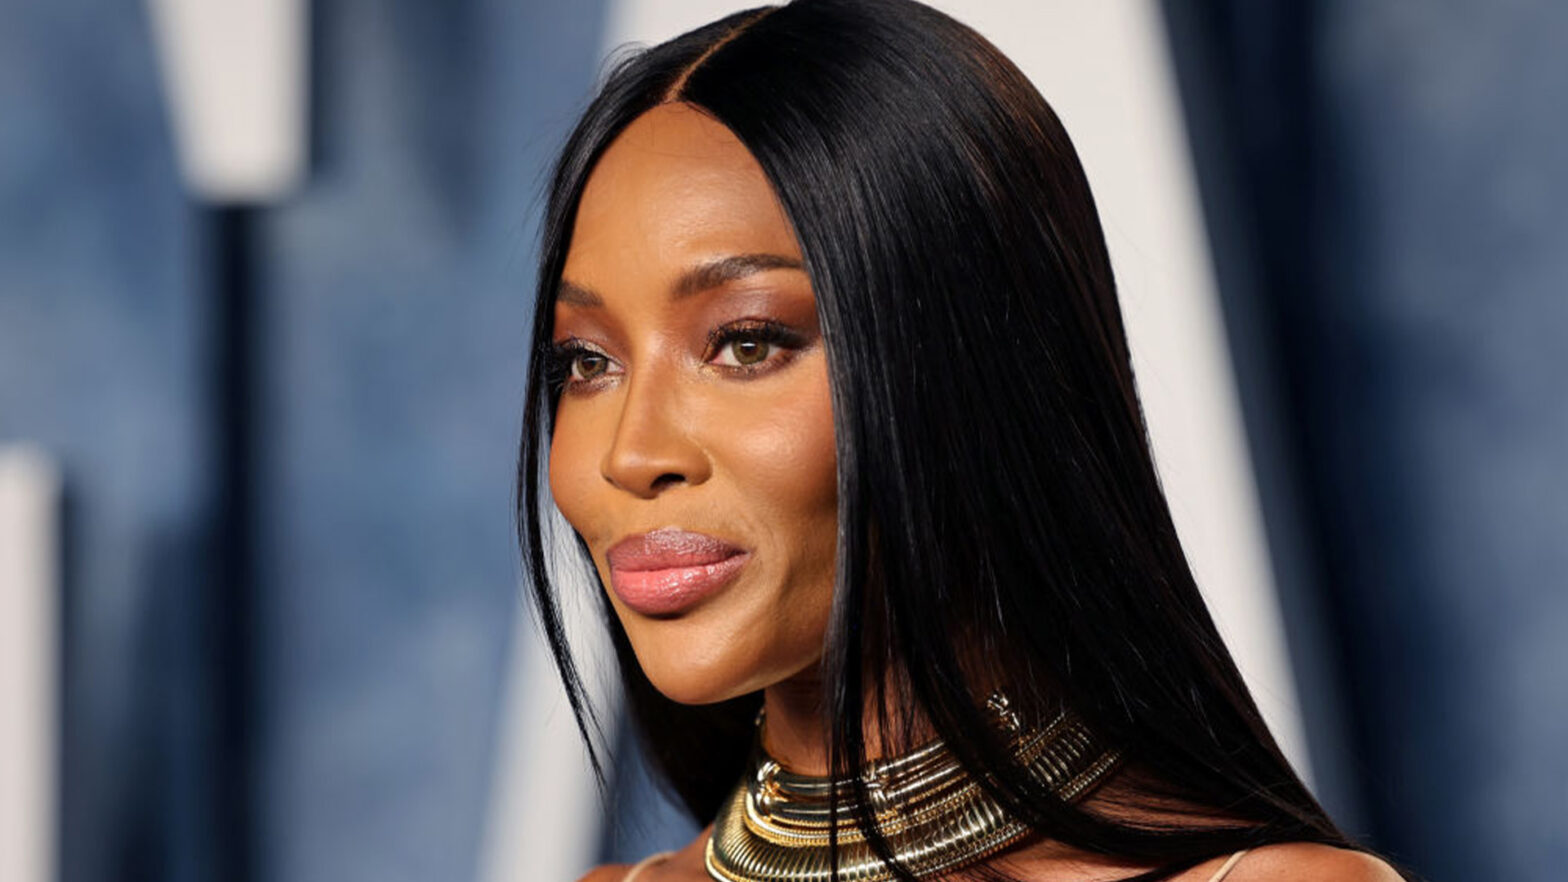 Naomi Campbell To Design Her Own BMW XM, The Company's Most Expensive Automobile